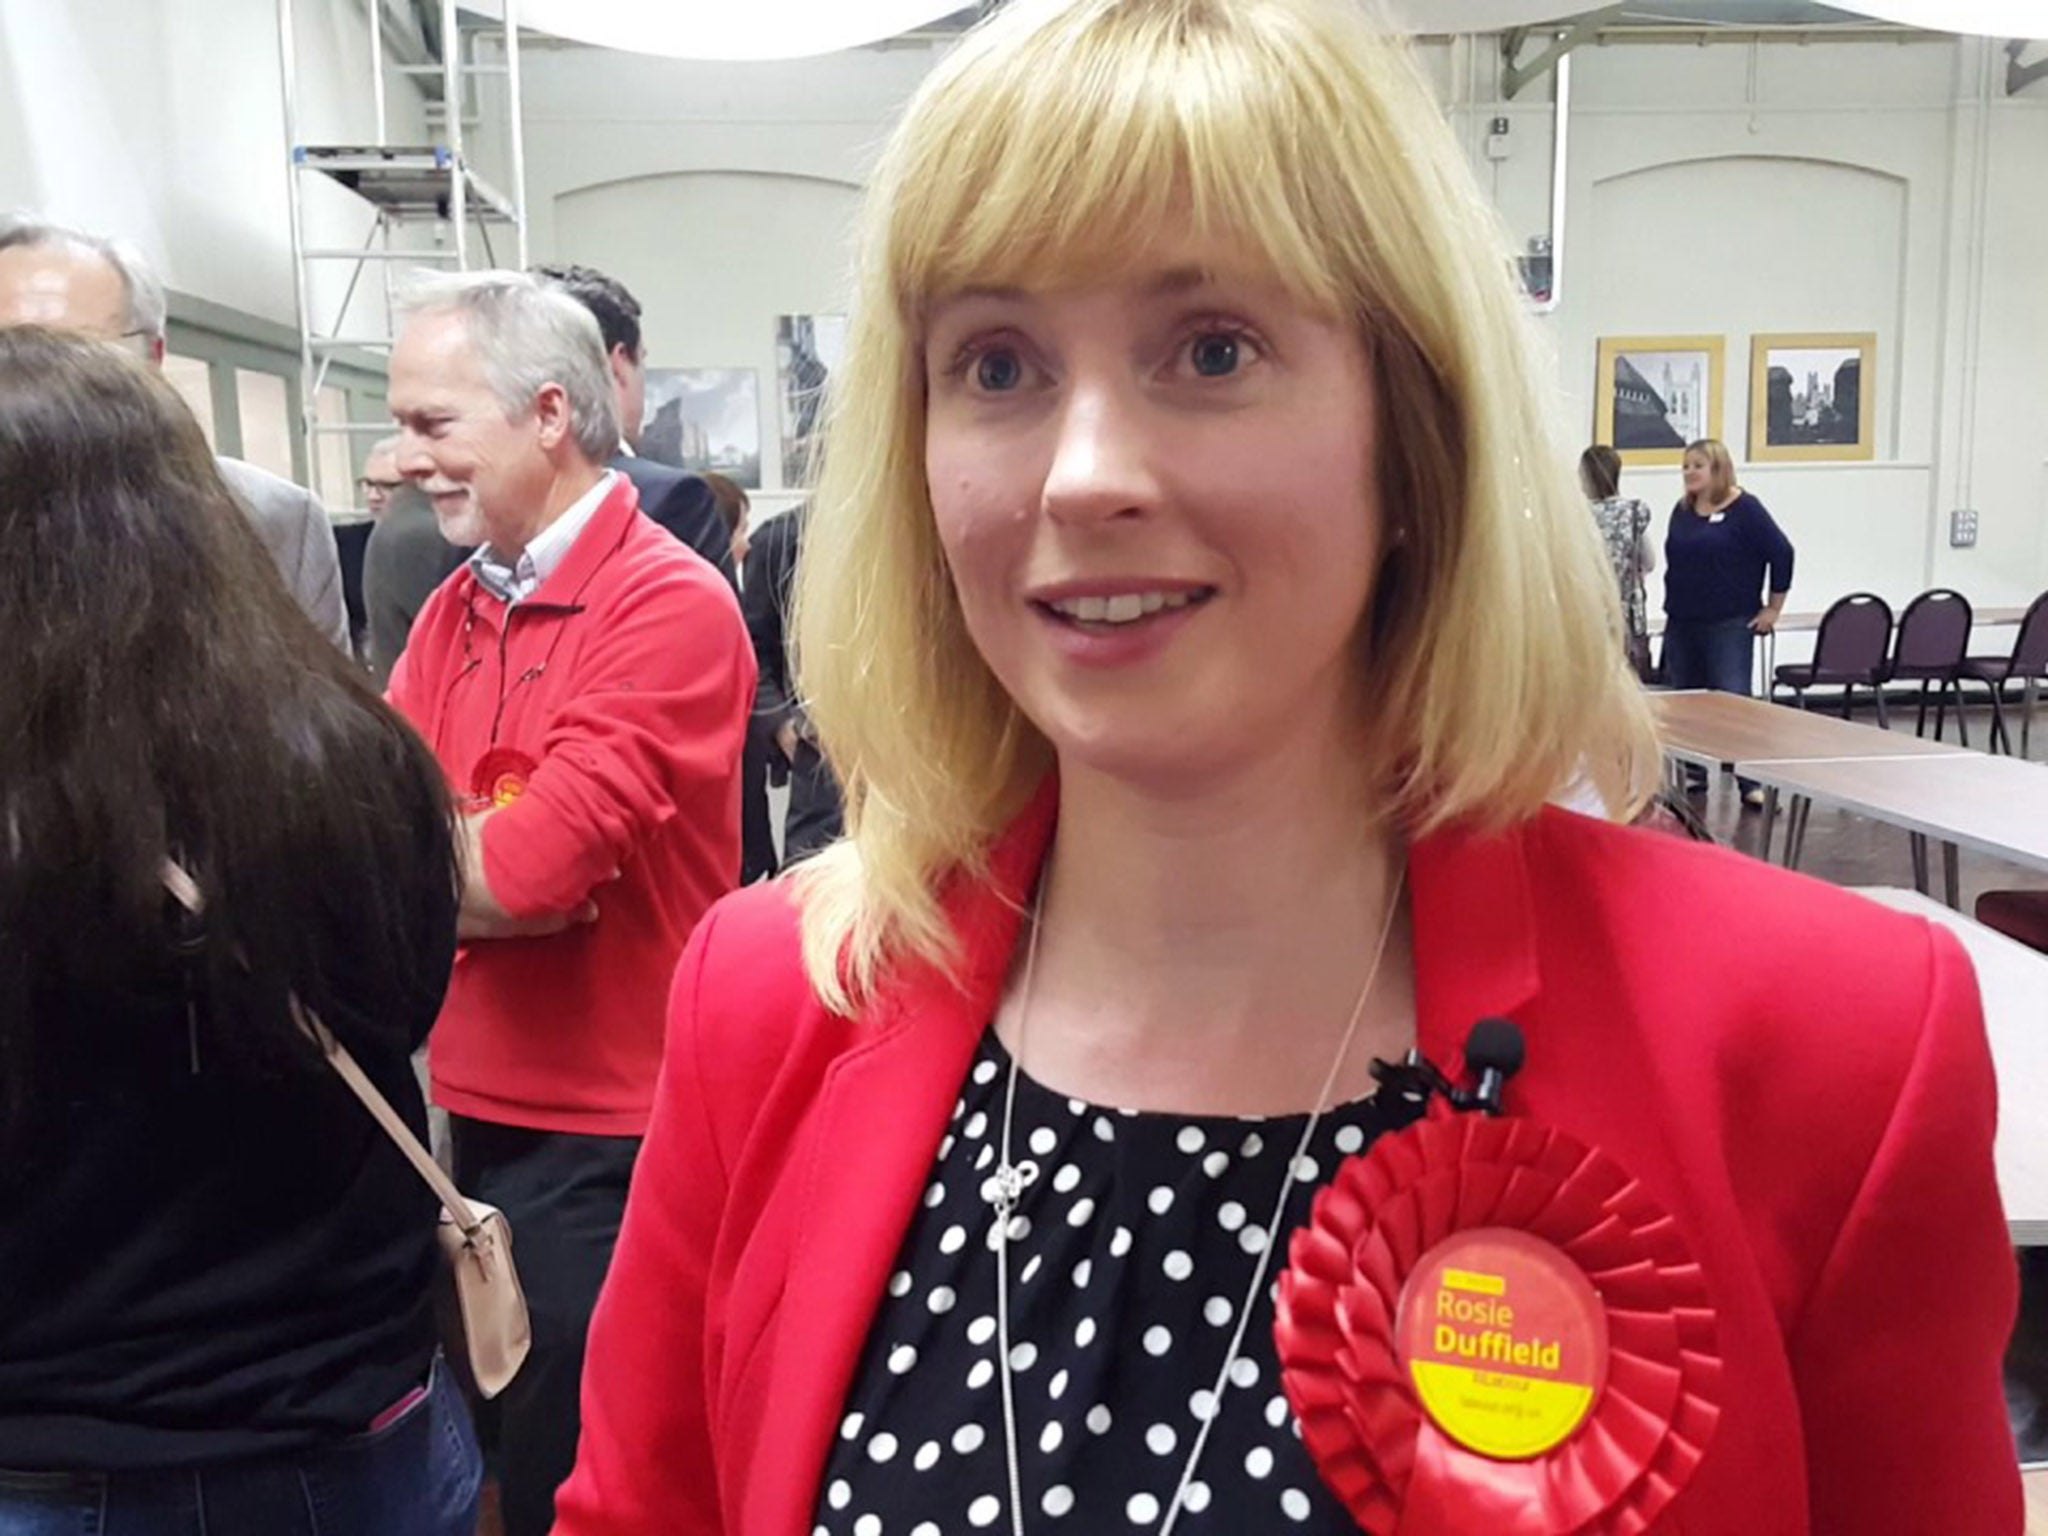 Rosie Duffield, the new Labour MP, has a track record of vigorous campaigning on local issues